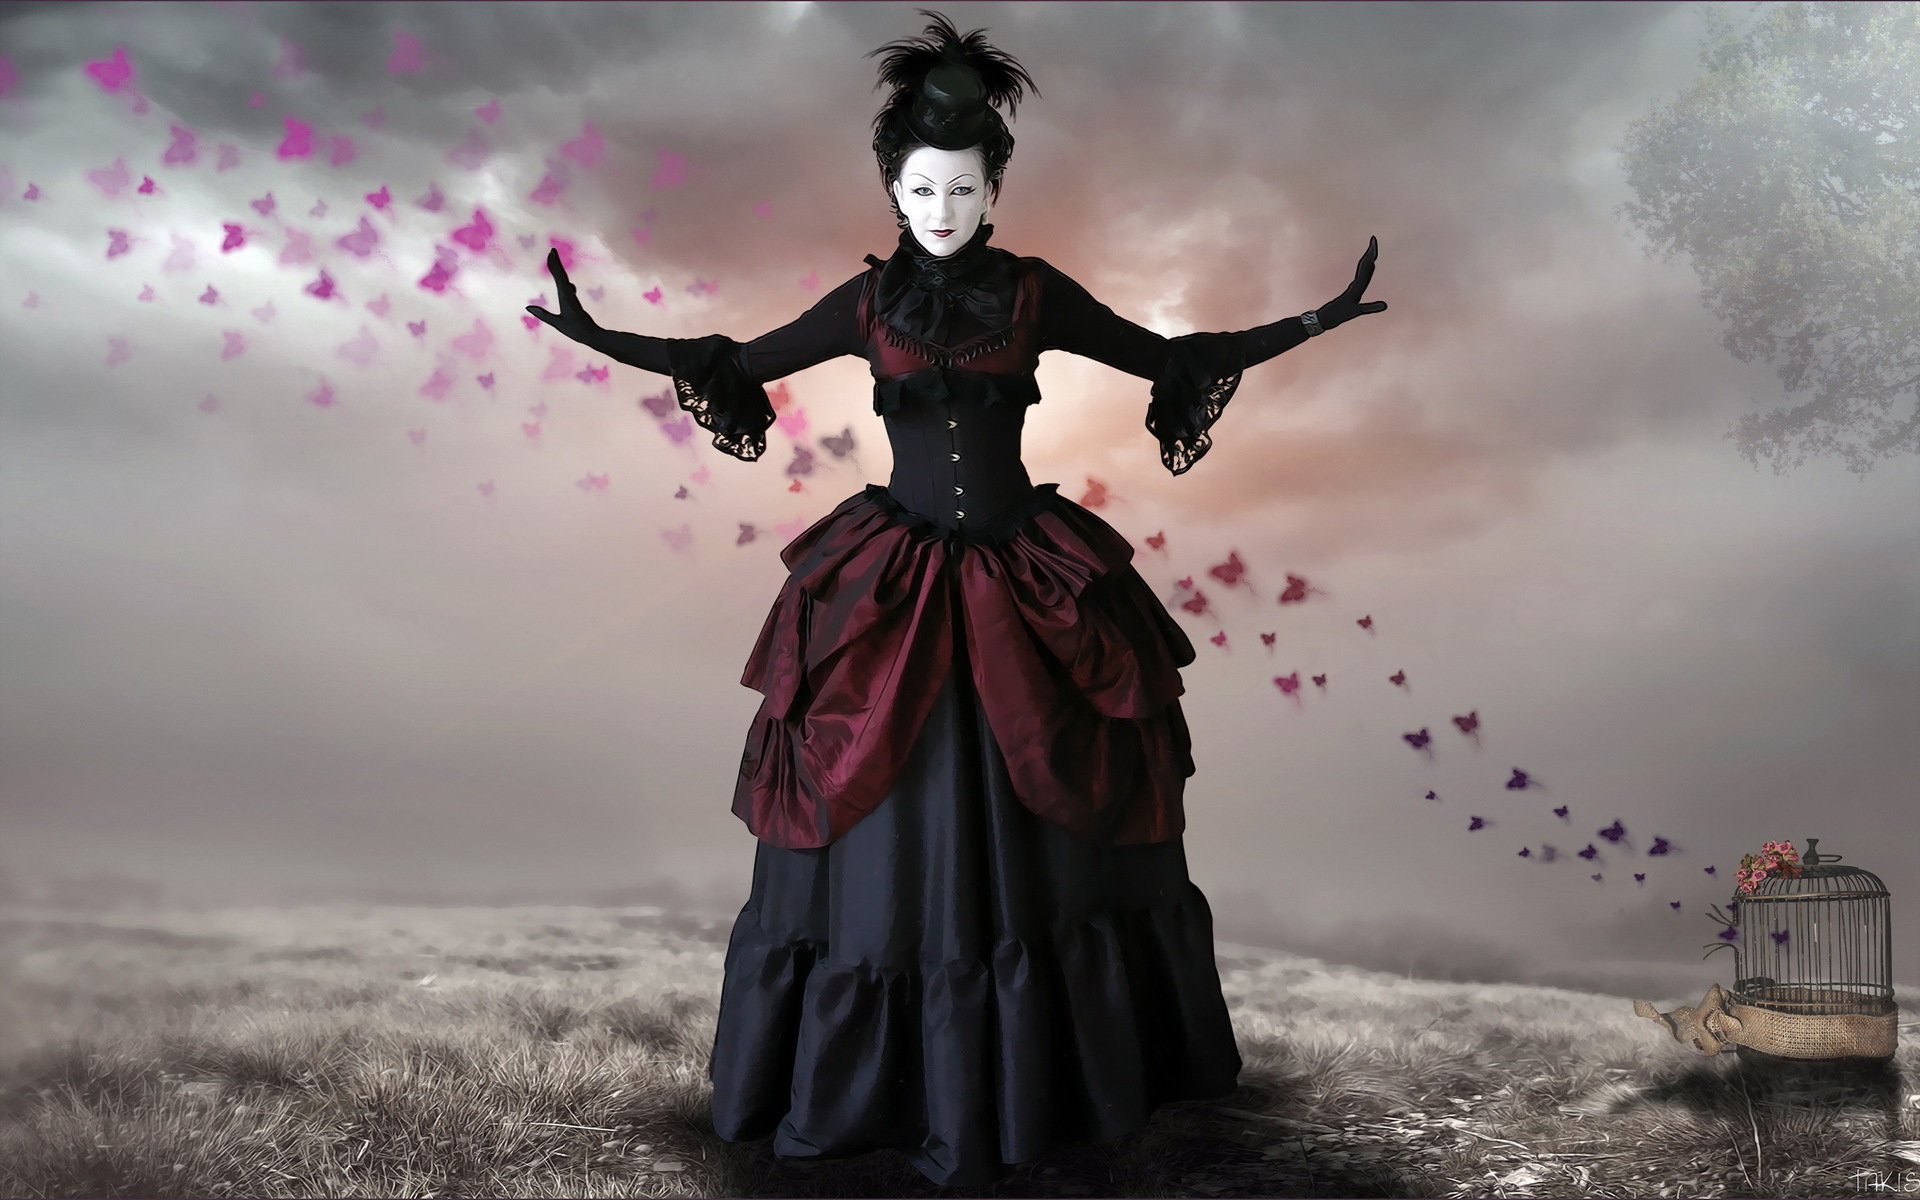 Image Gothic Witch Art Pc Android iPhone And iPad Wallpaper